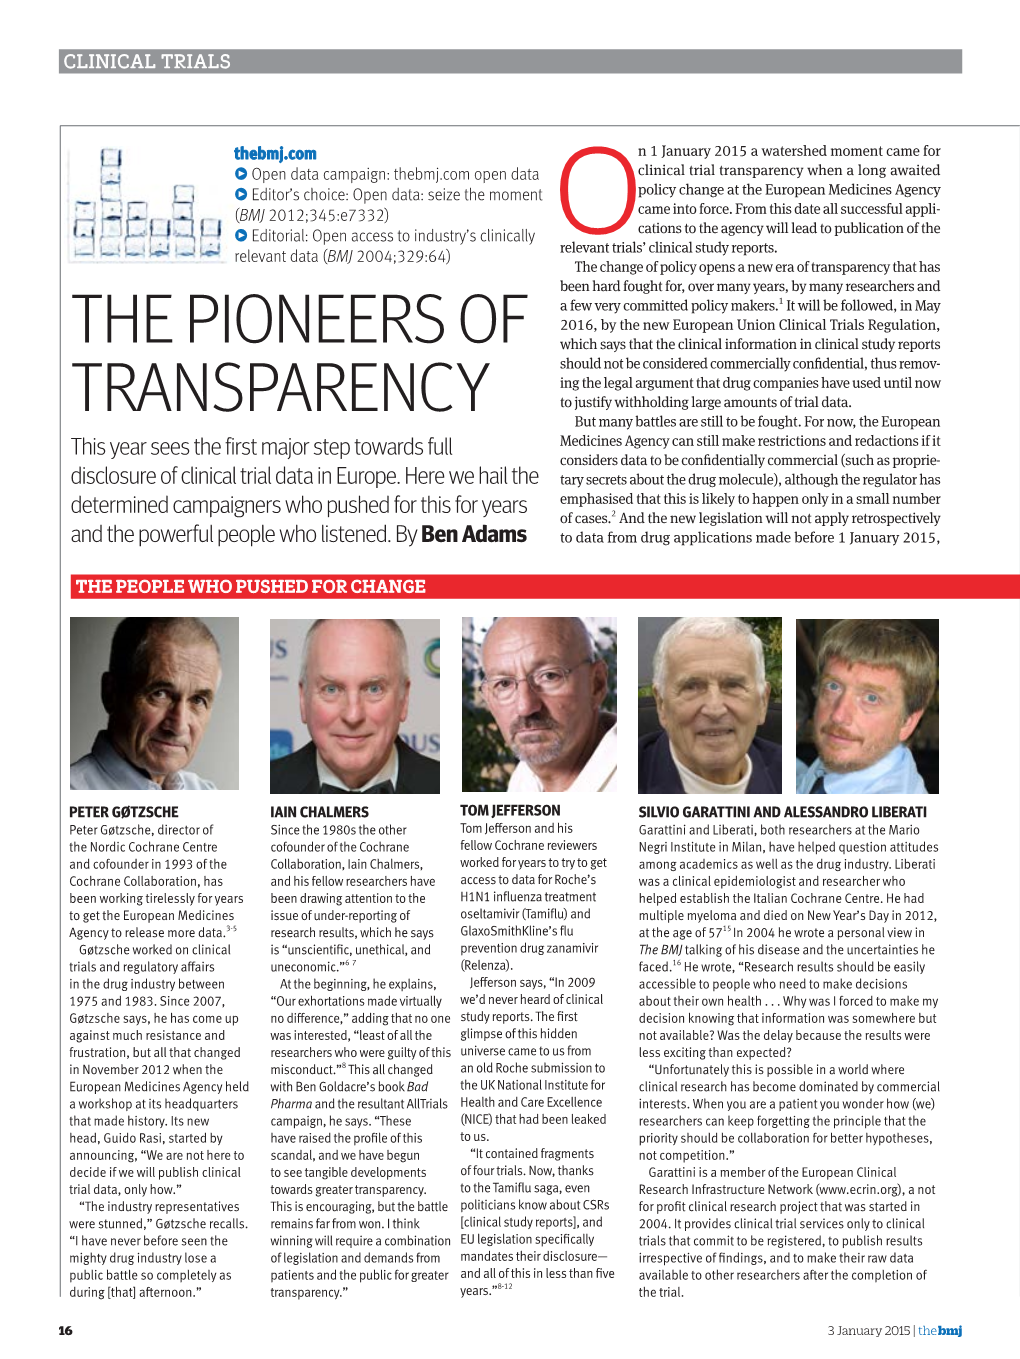 The Pioneers of Transparency